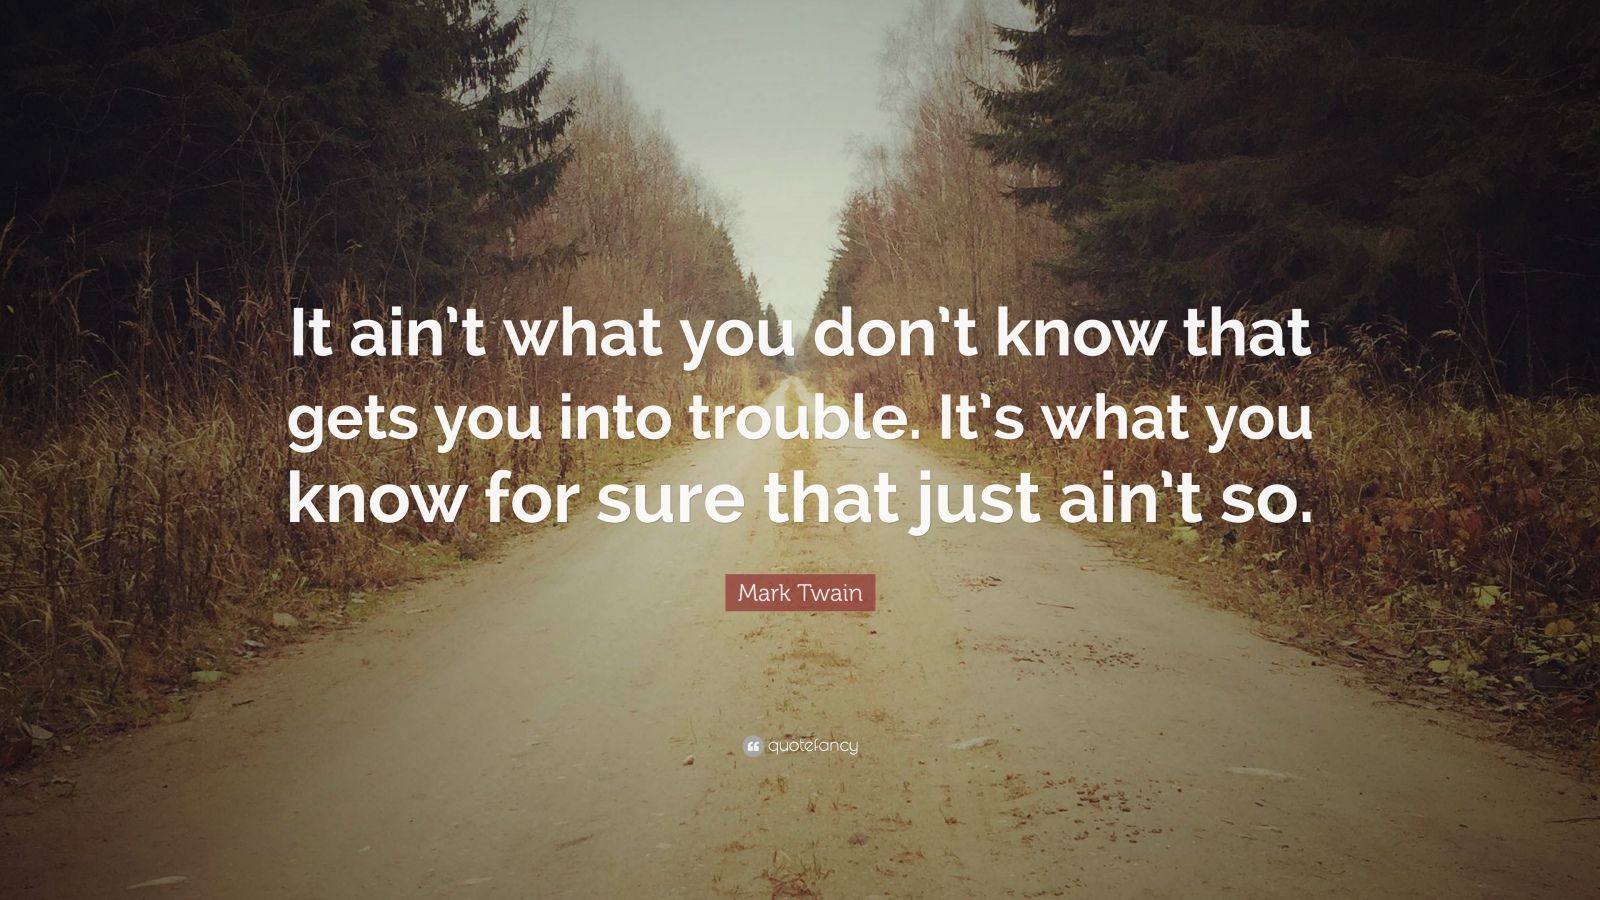 Mark Twain Quote: “It ain’t what you don’t know that gets you into